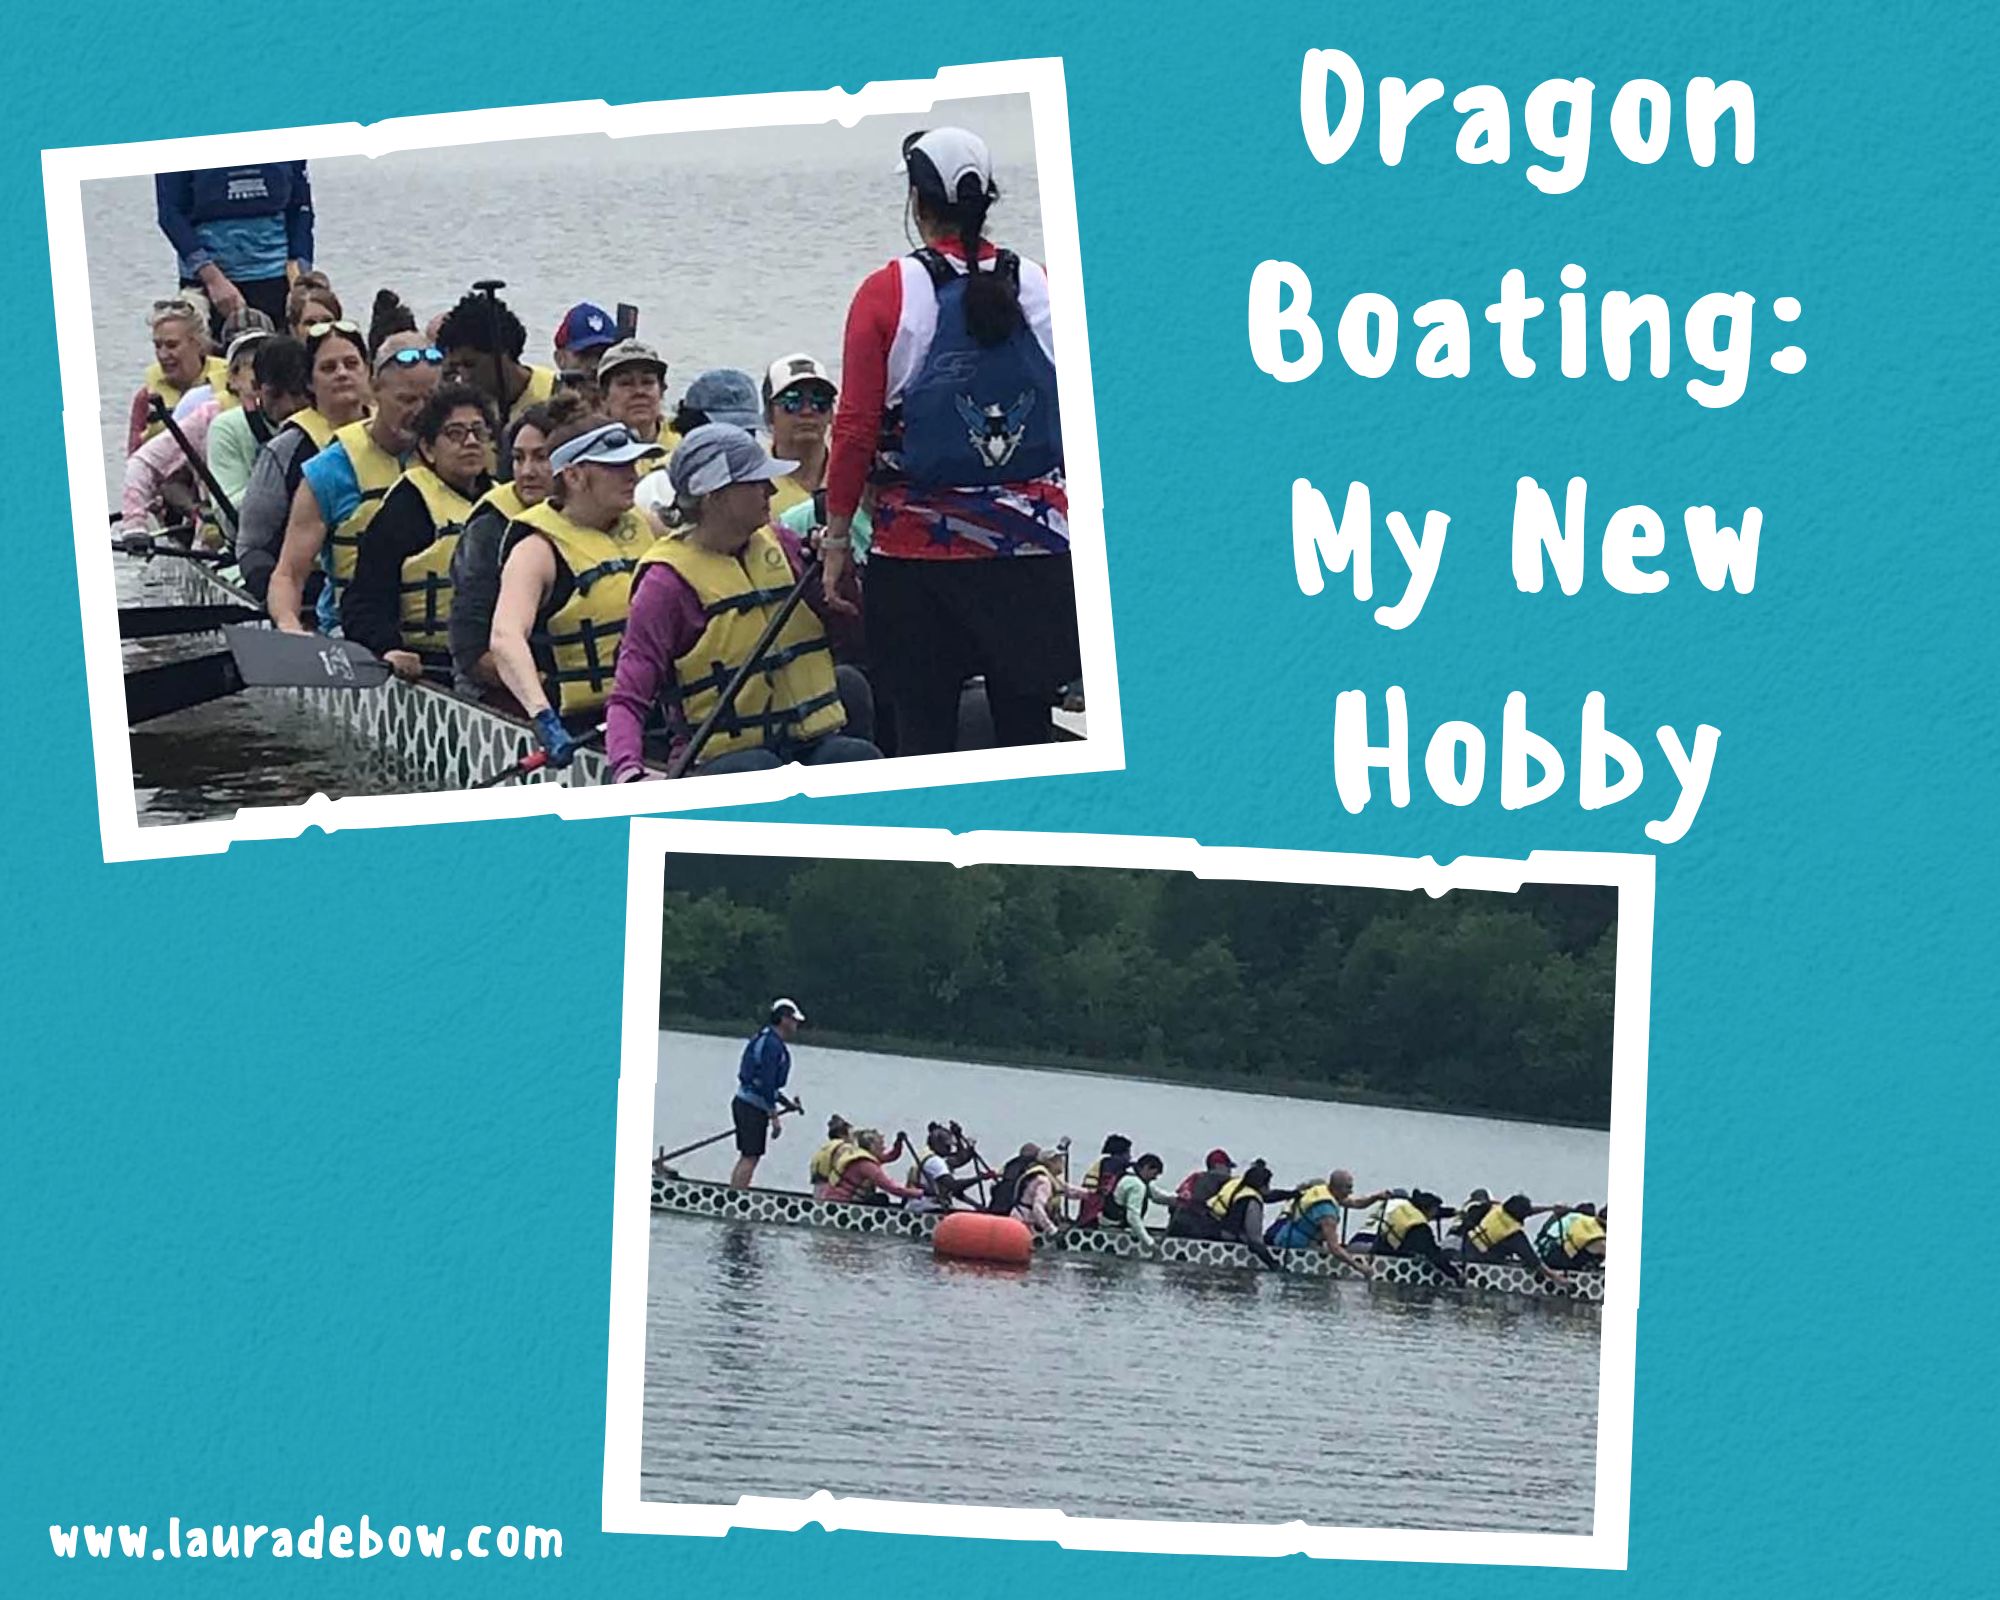 Photos of dragon boat team paddlers in a boat